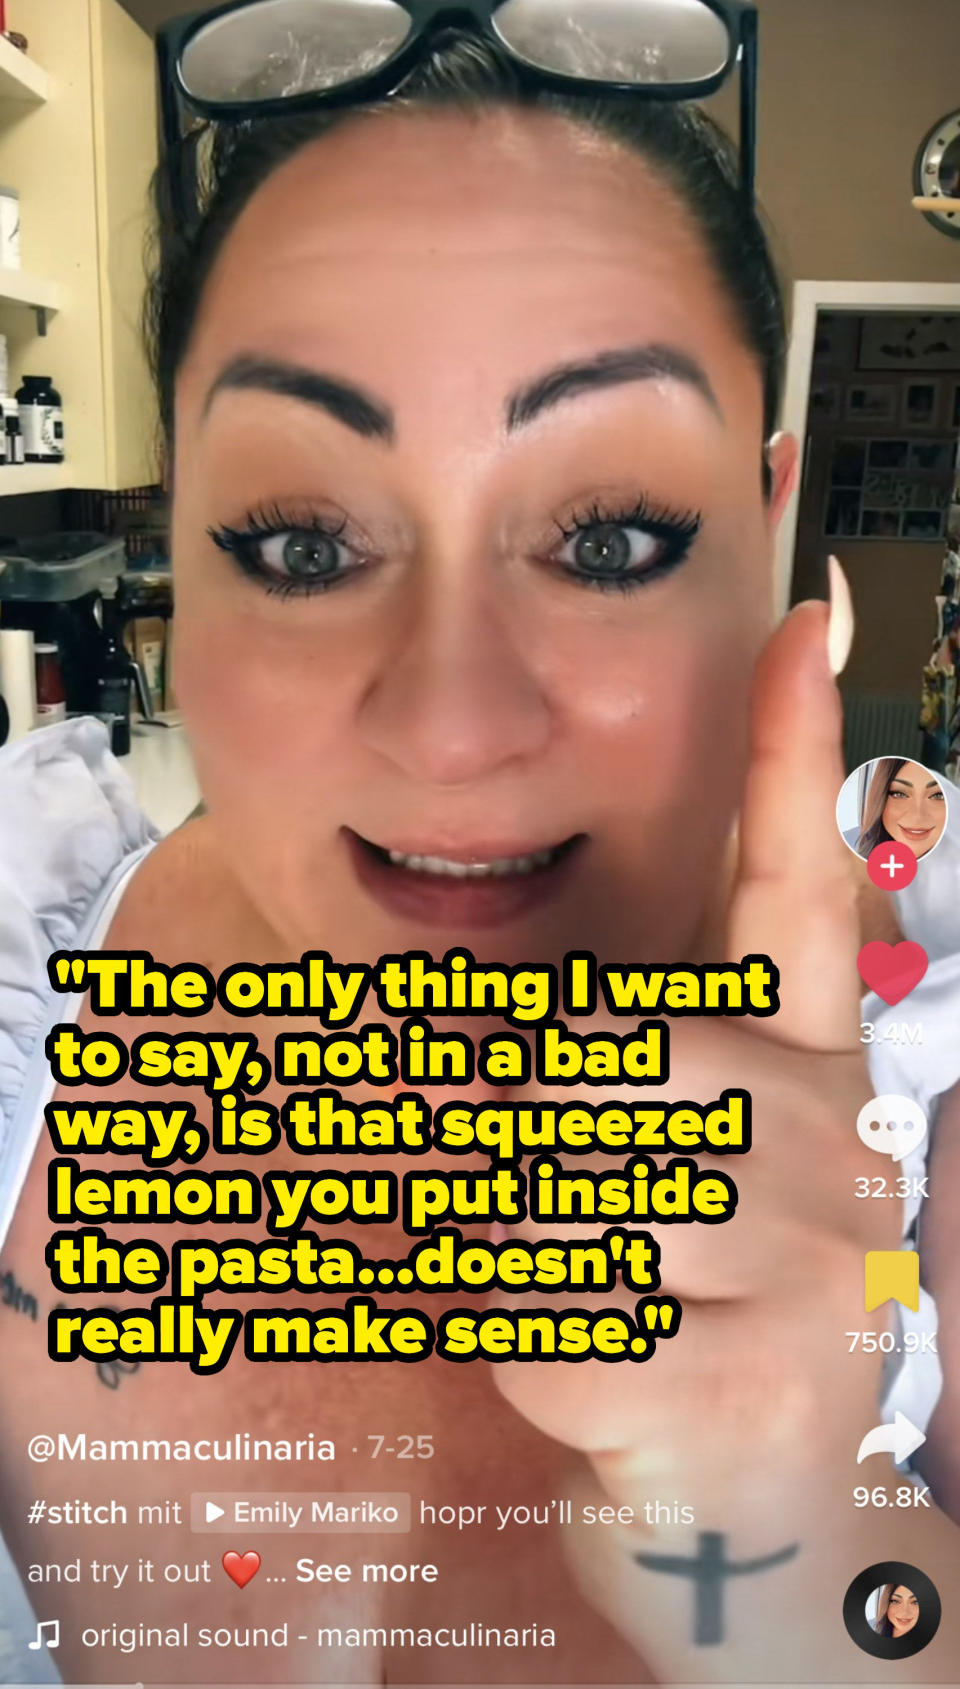 Woman saying that the squeezed lemon put inside the pasta doesn't really make sense